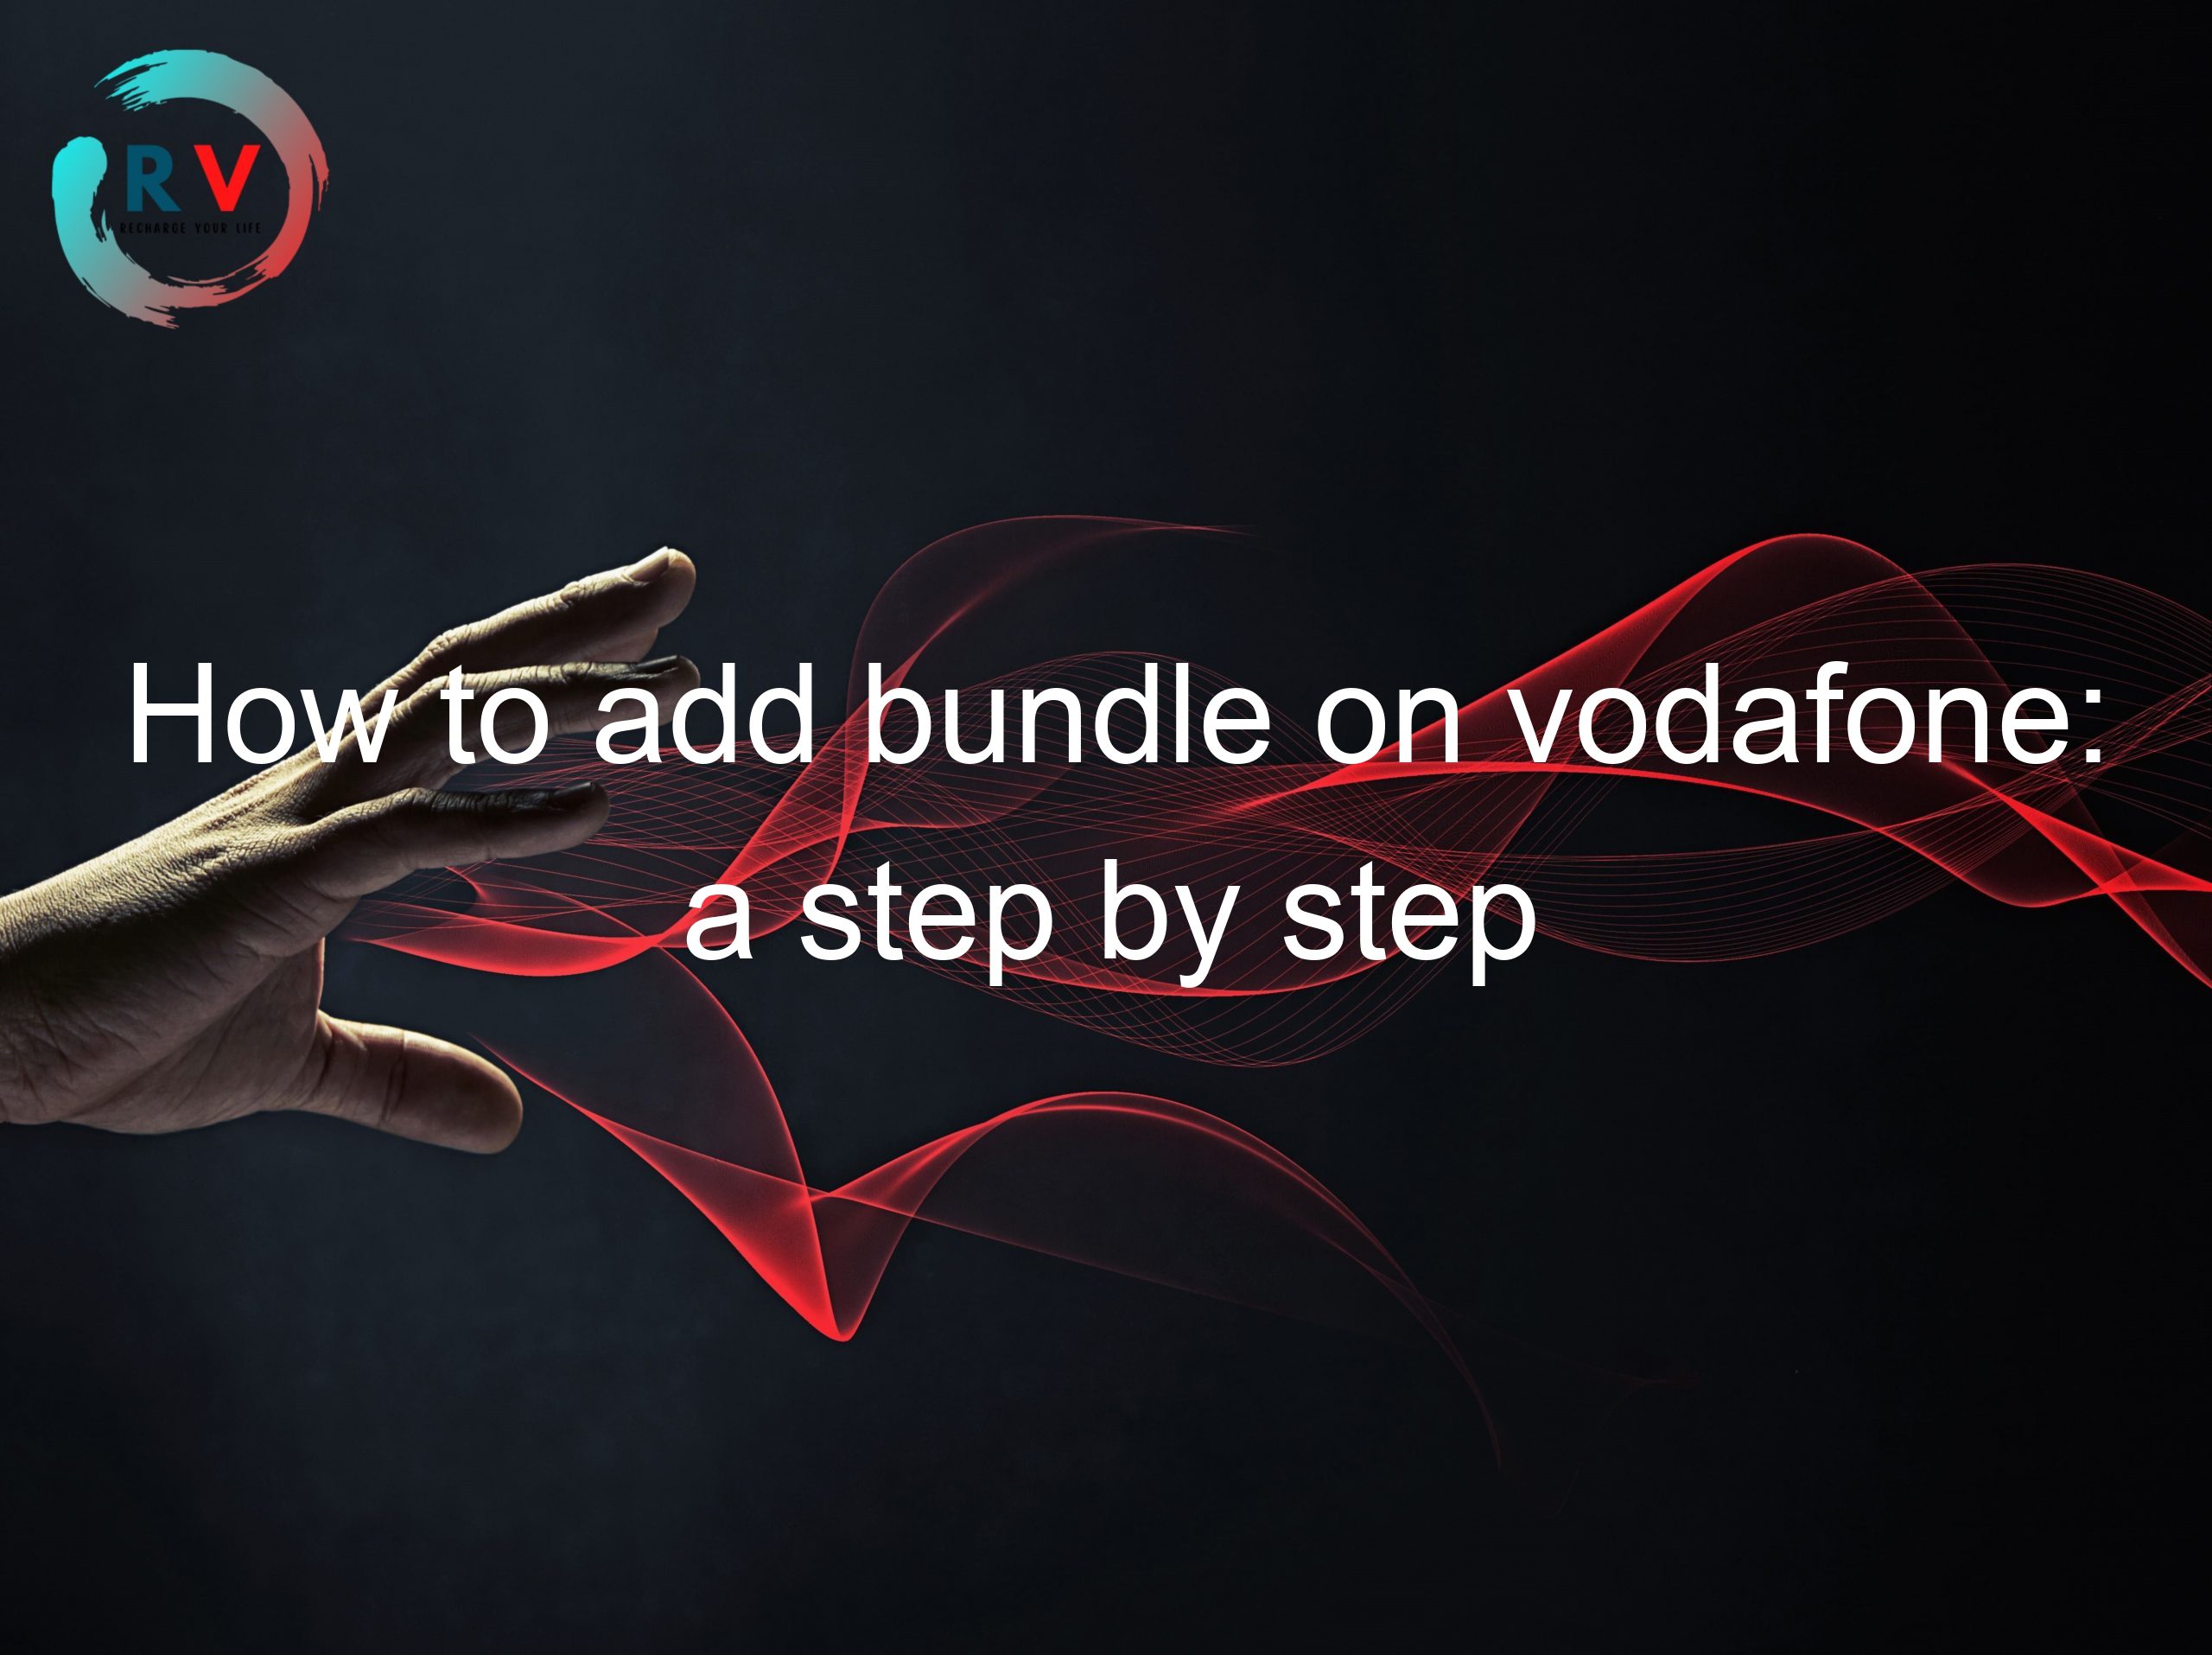 How to add bundle on vodafone: a step by step guide